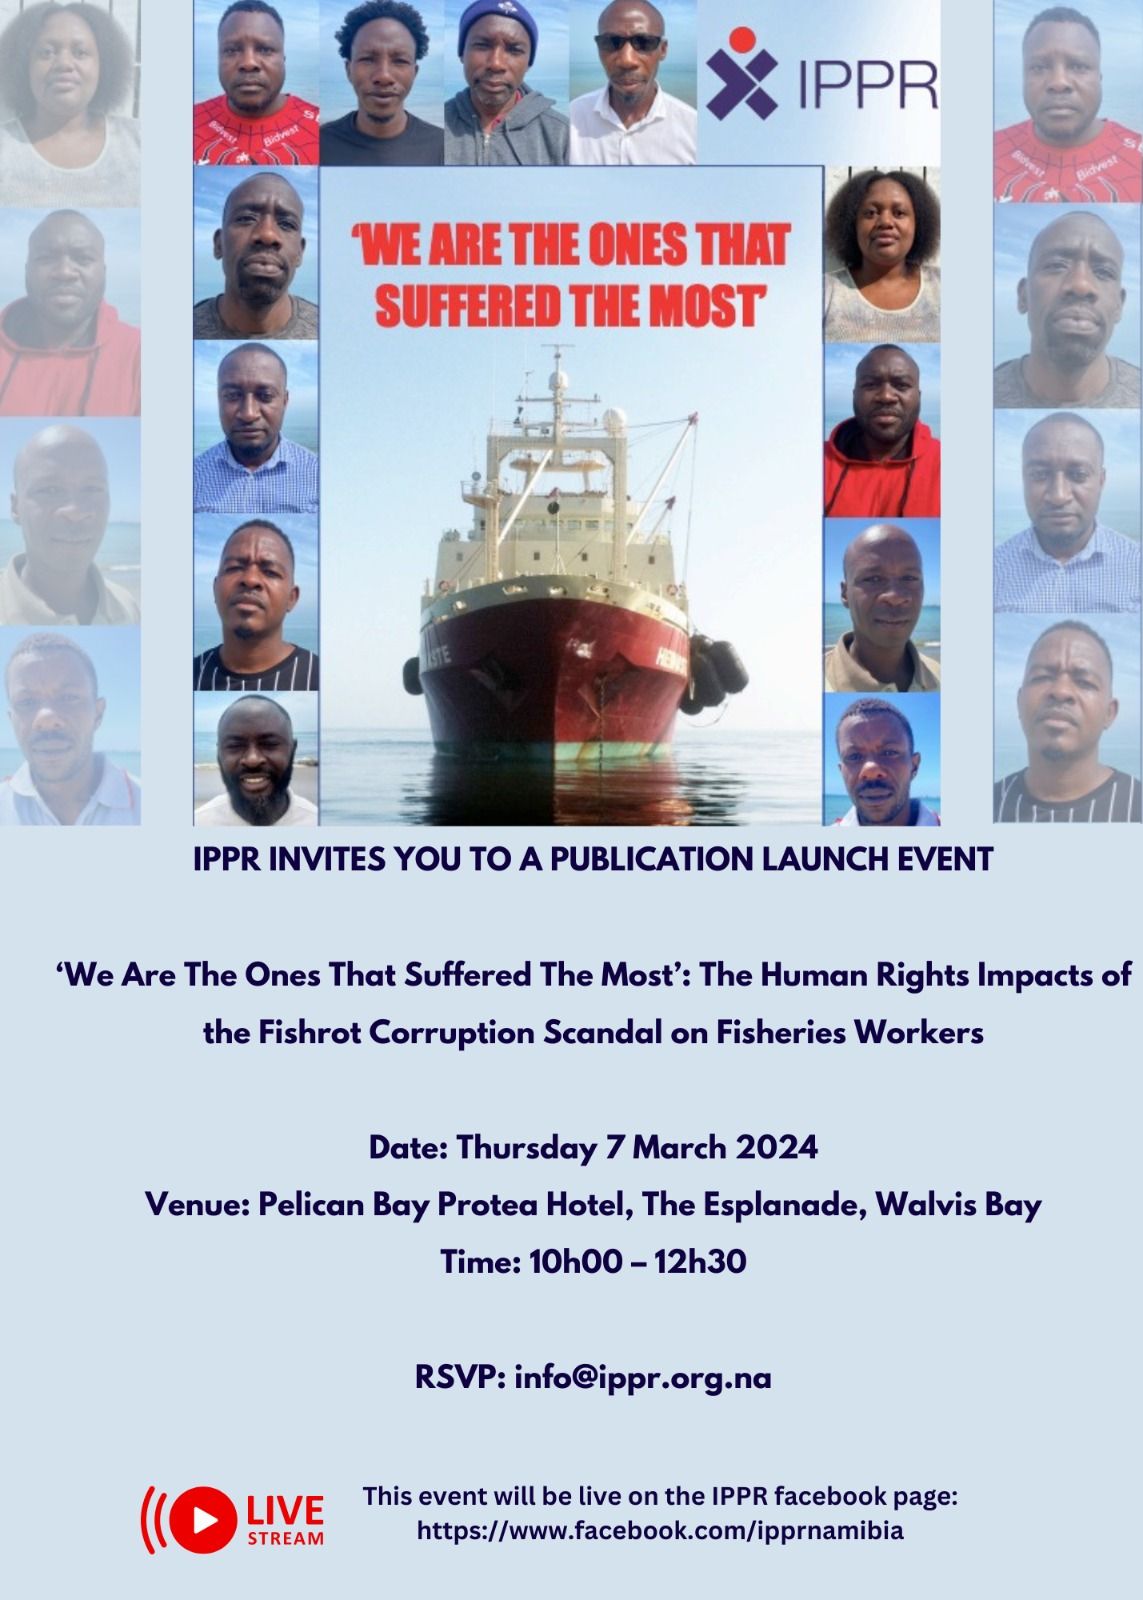 'We Are The Ones Who Suffered The Most': The Human Rights Impacts of The Fishrot Corruption Scandal on Fisheries Workers